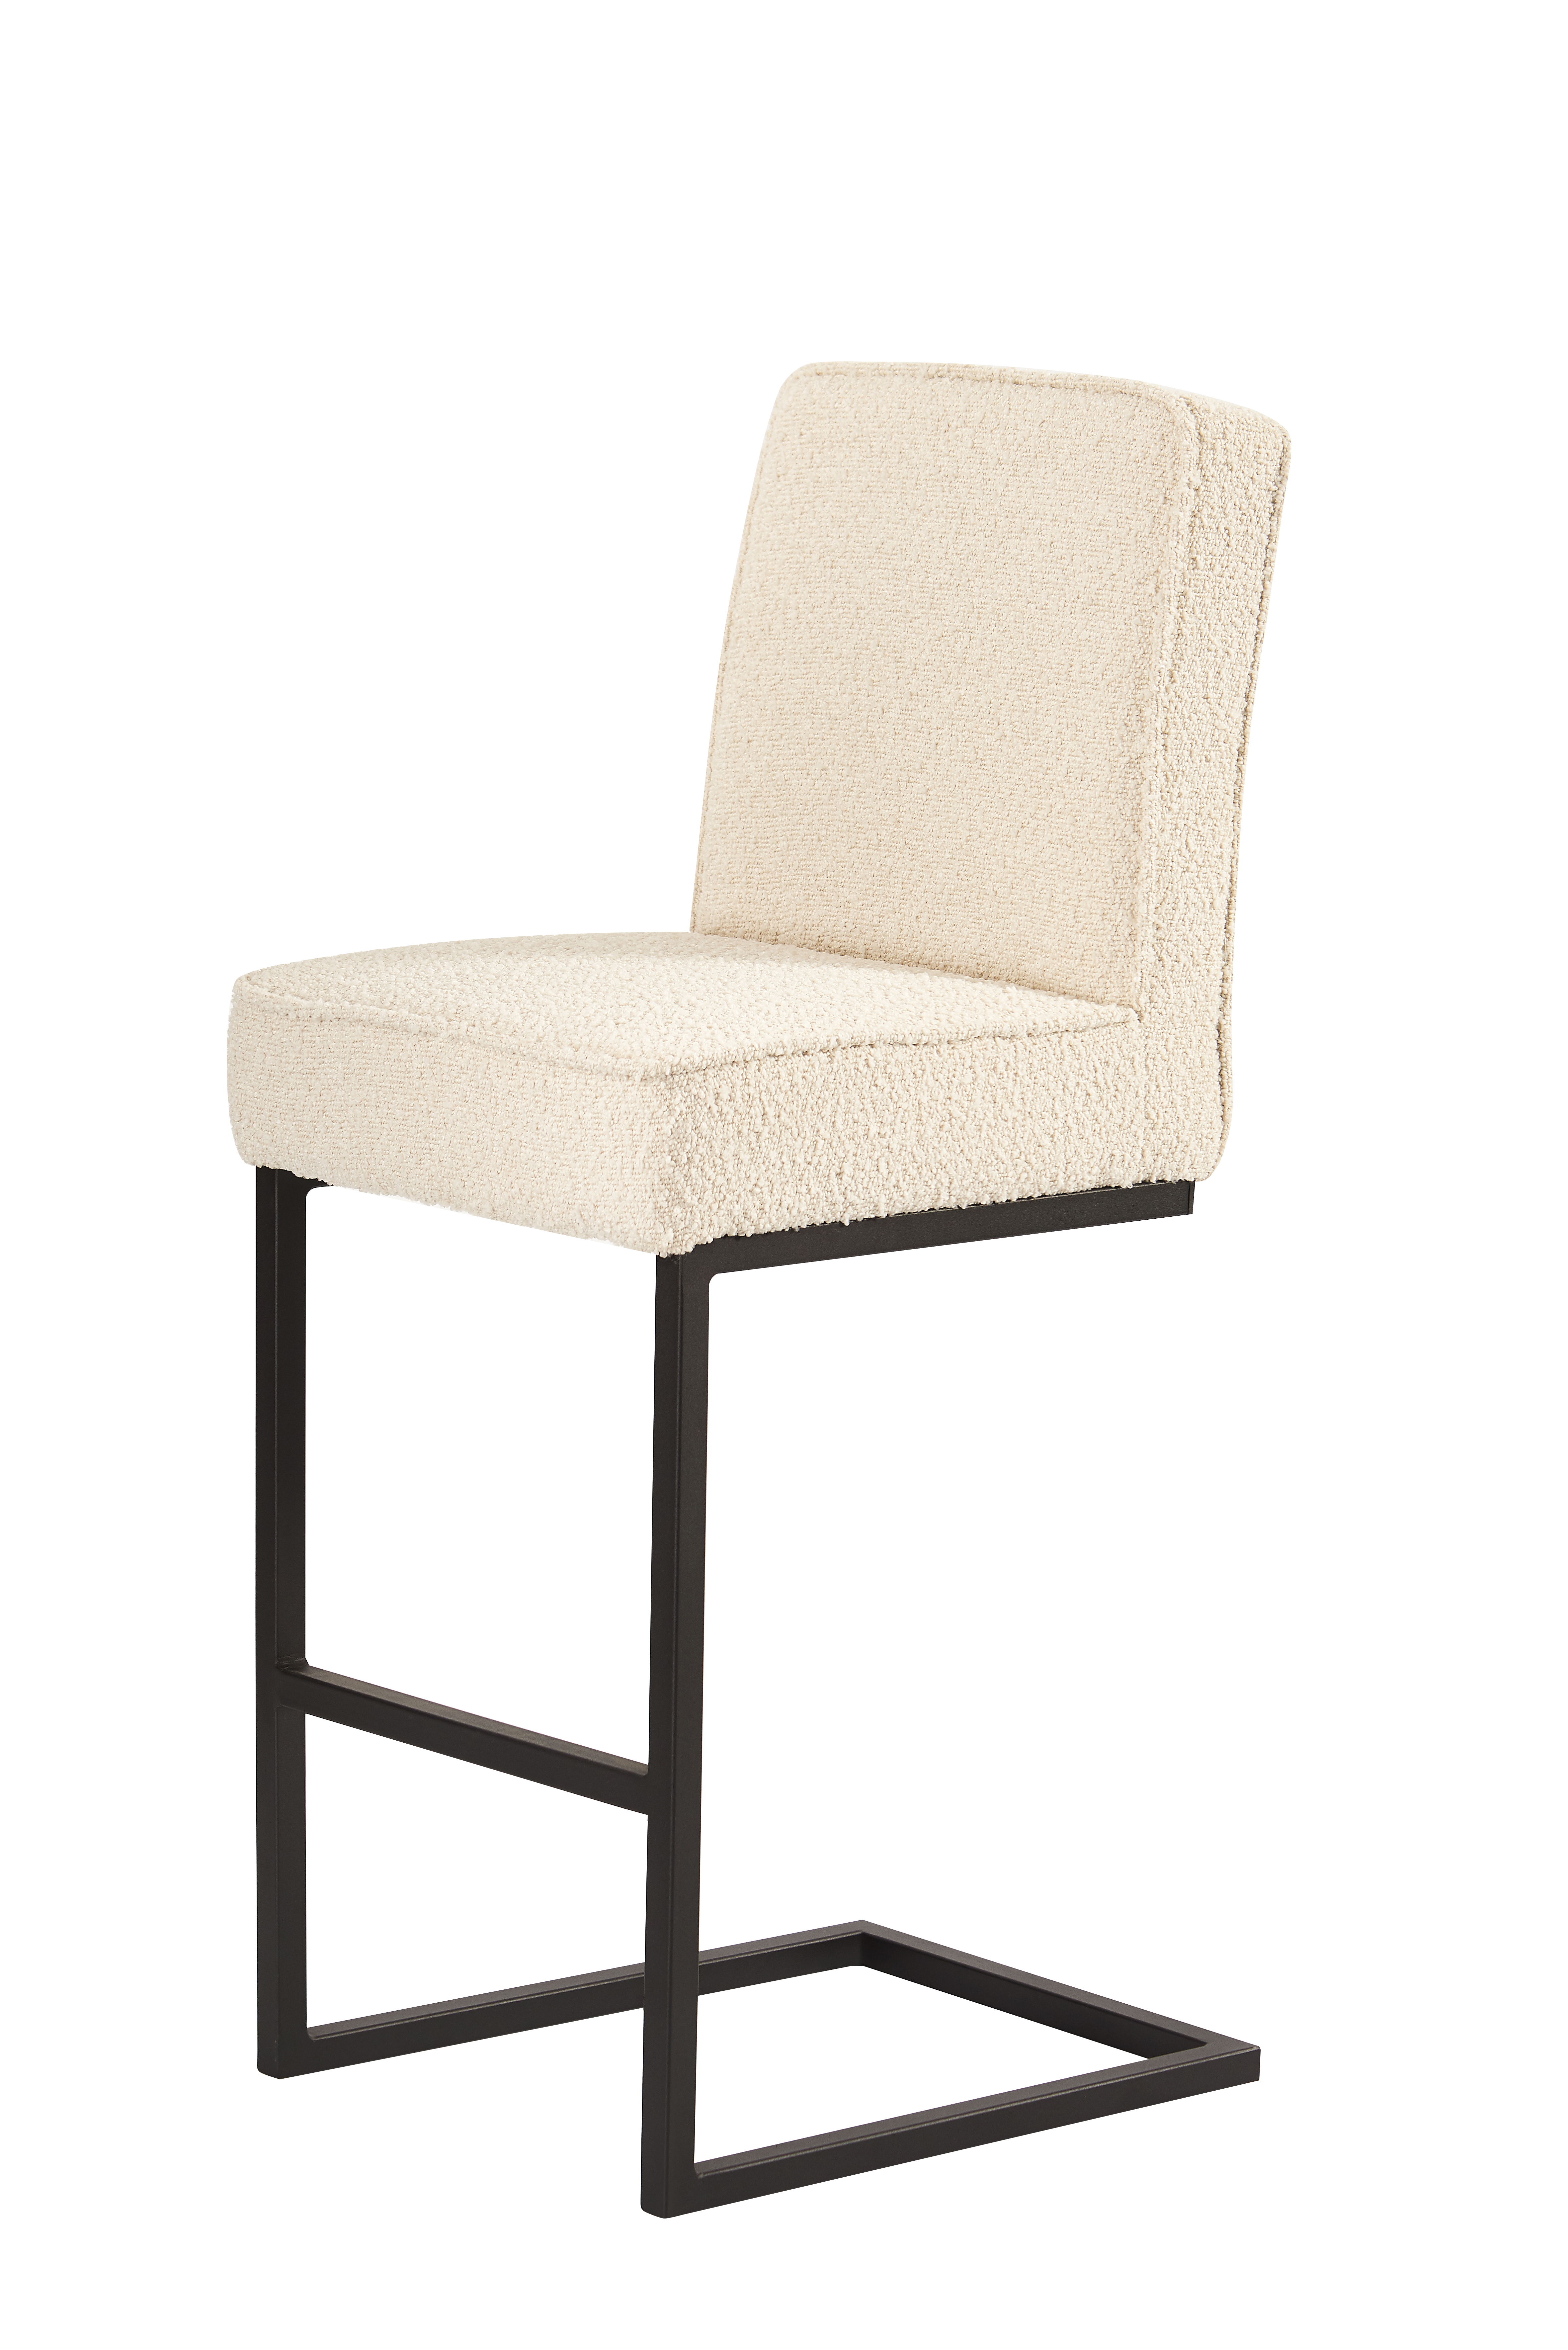 Promotional Bar Stool BA-2150 With Teddy fabric Featured Image